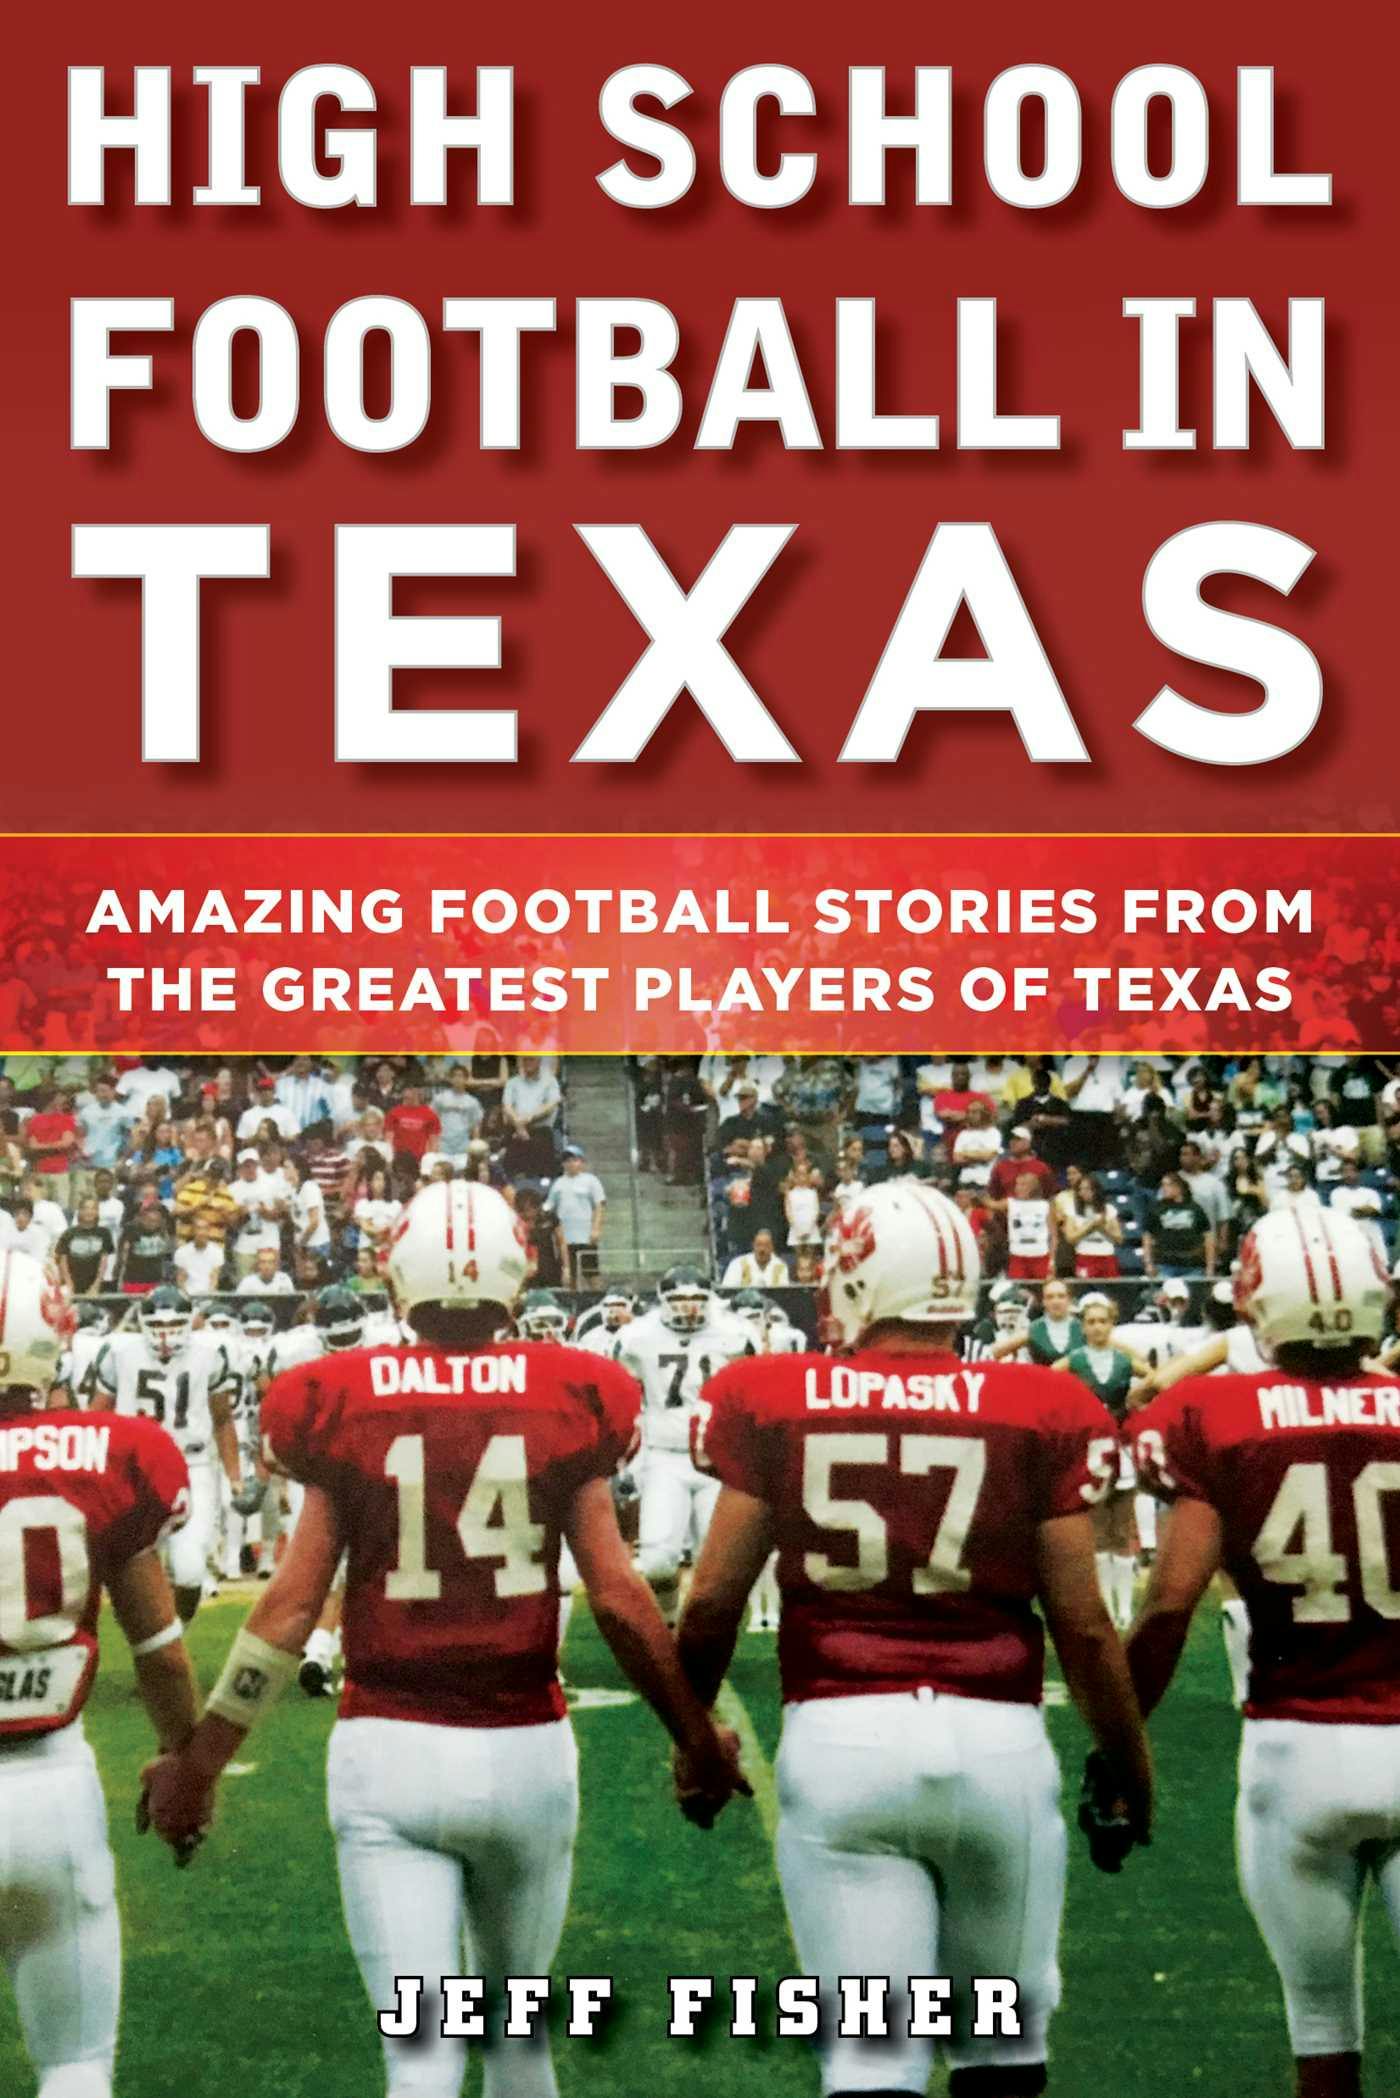 High School Football in Texas: Amazing Football Stories From the Greatest Players of Texas - Jeff Fisher